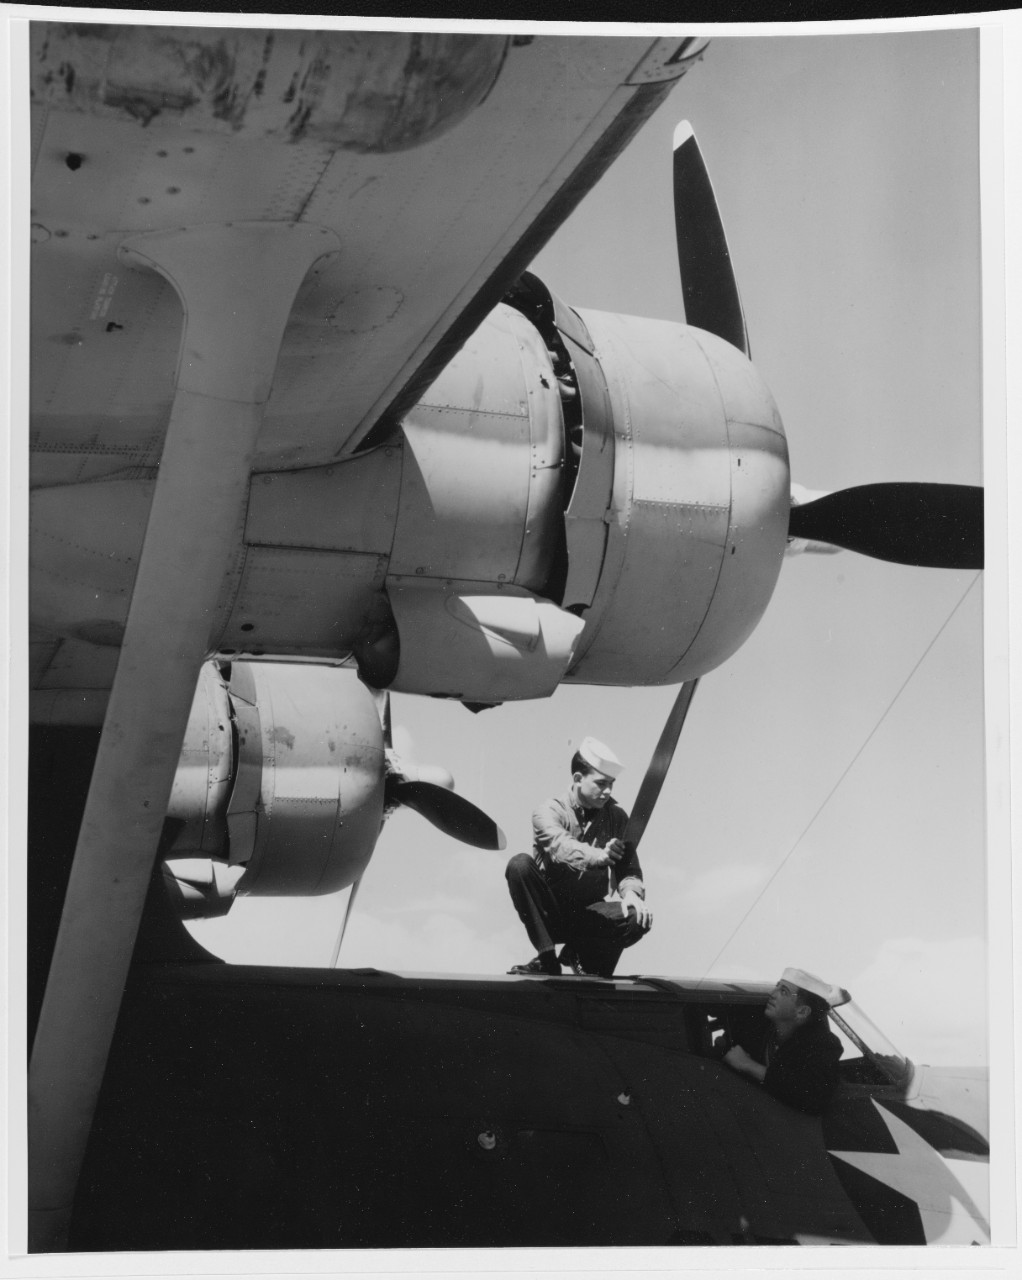 Consolidated PBY-5 or 5A Catalina Patrol Bomber